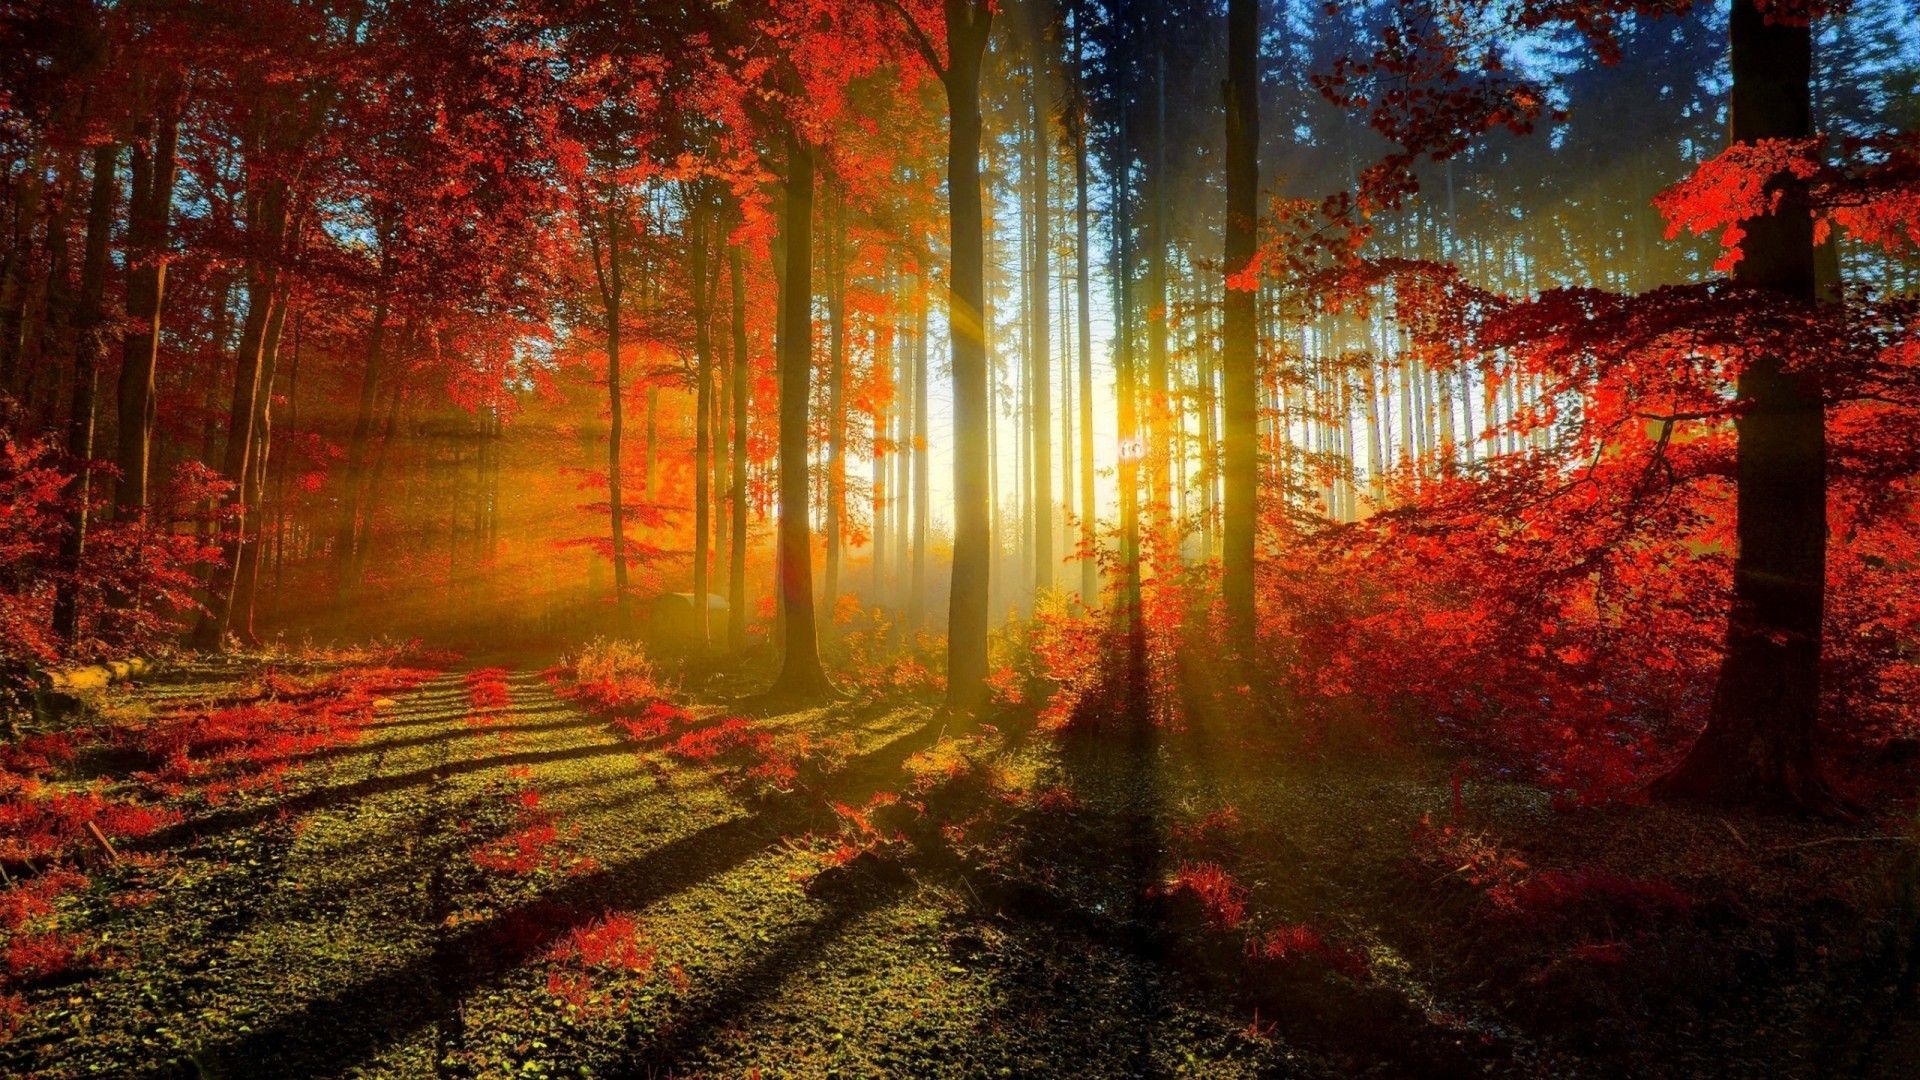 Download 1920x1080 Autumn, Sunrays, Trees, Forest, Fall Wallpaper for Widescreen